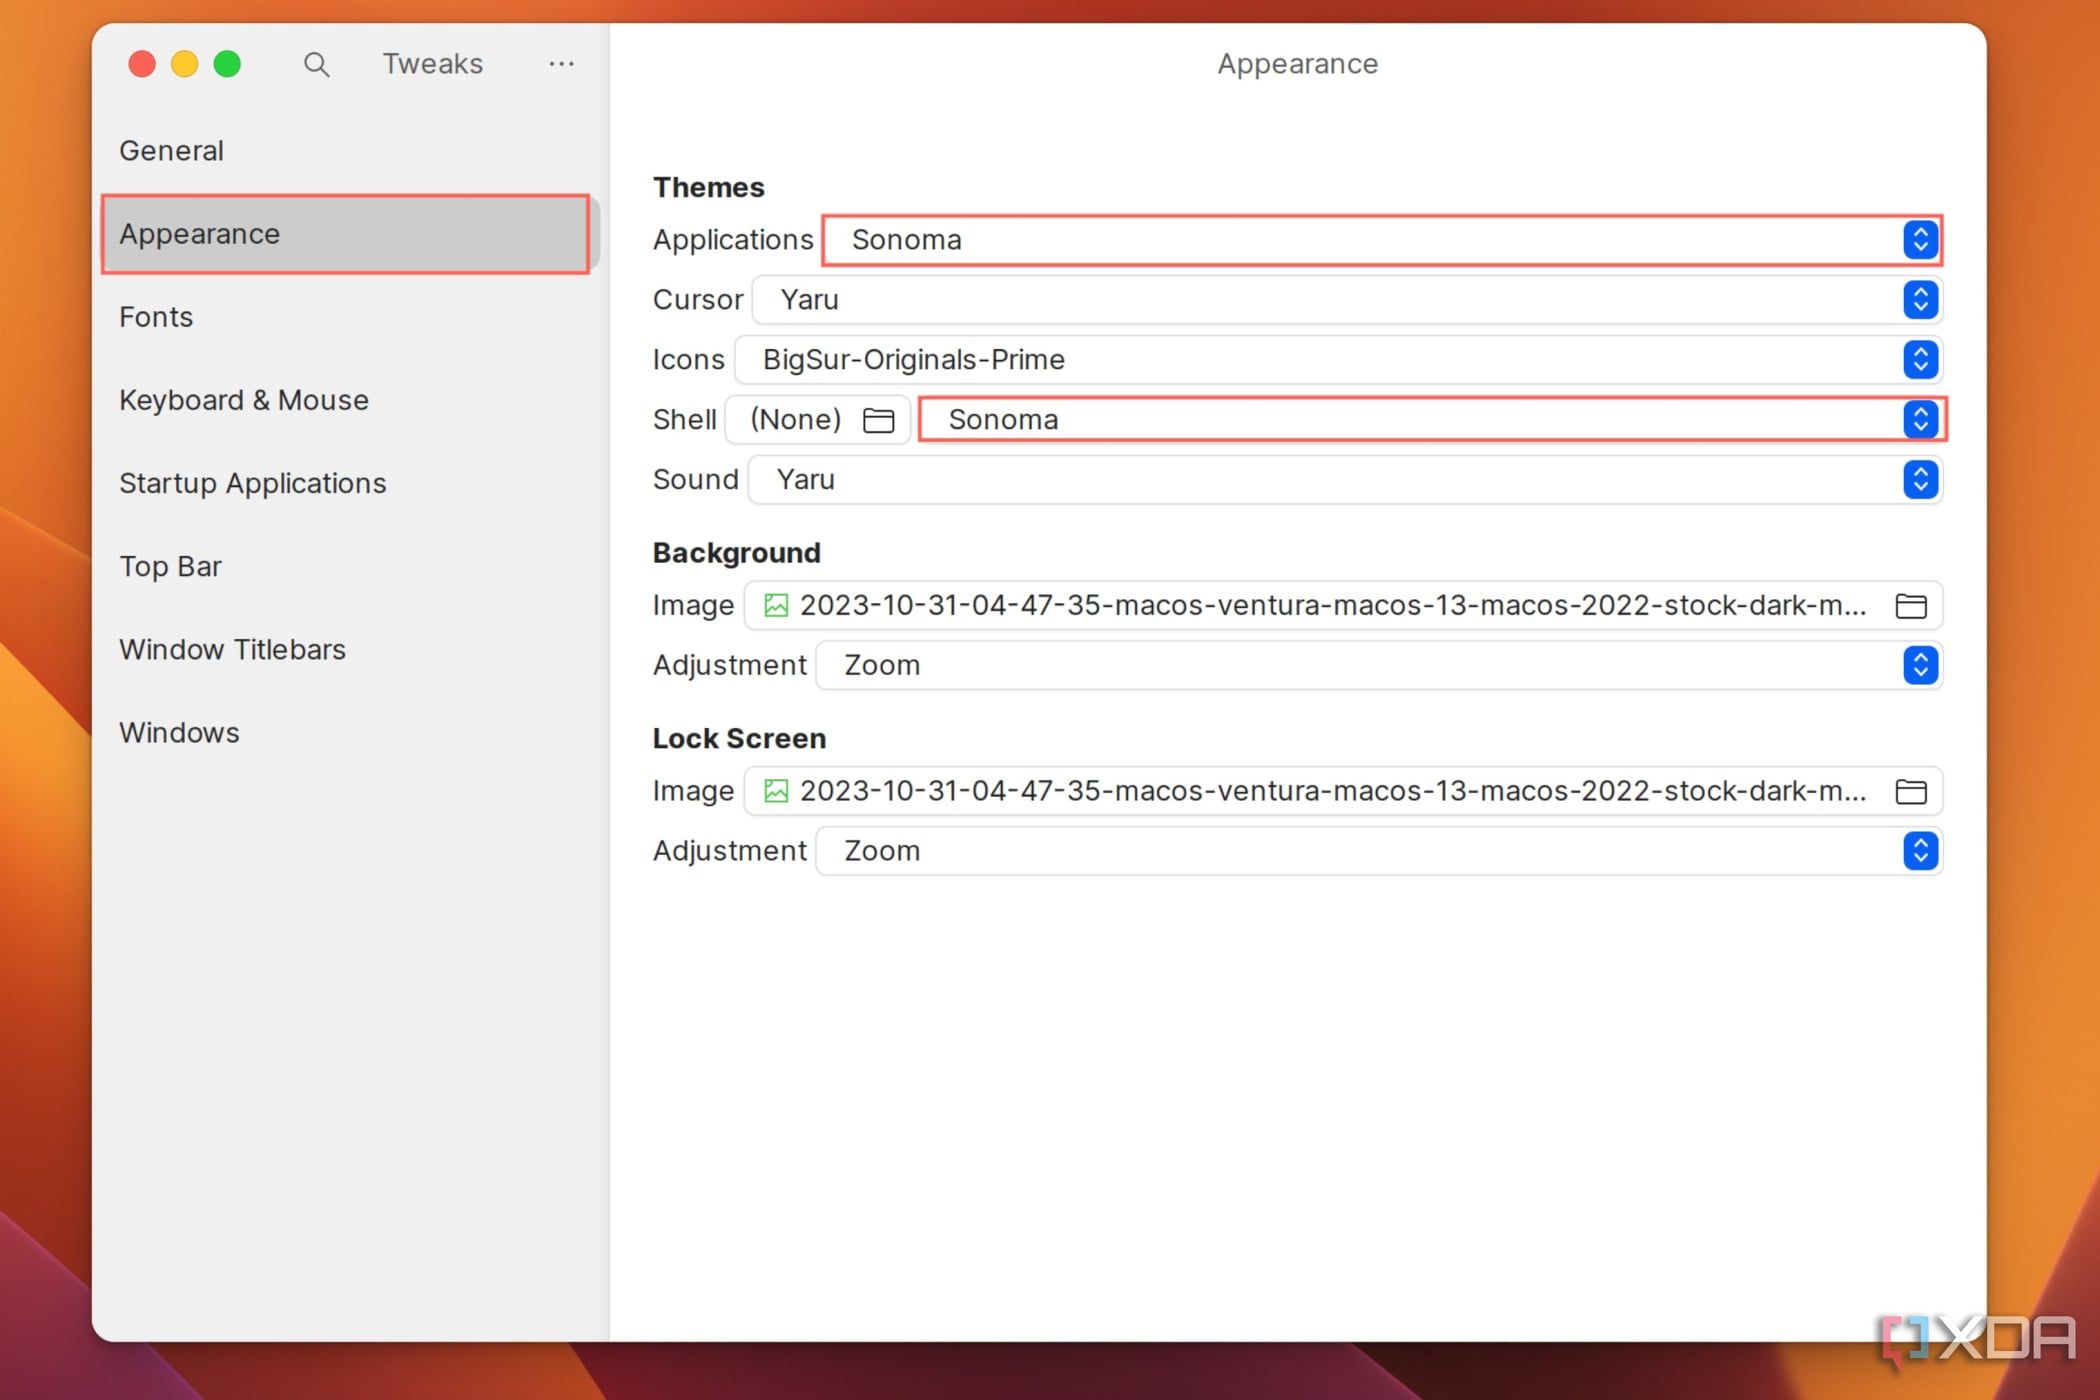 A screenshot of the Tweaks app with the options to set the Applications and Shell themes highlighted